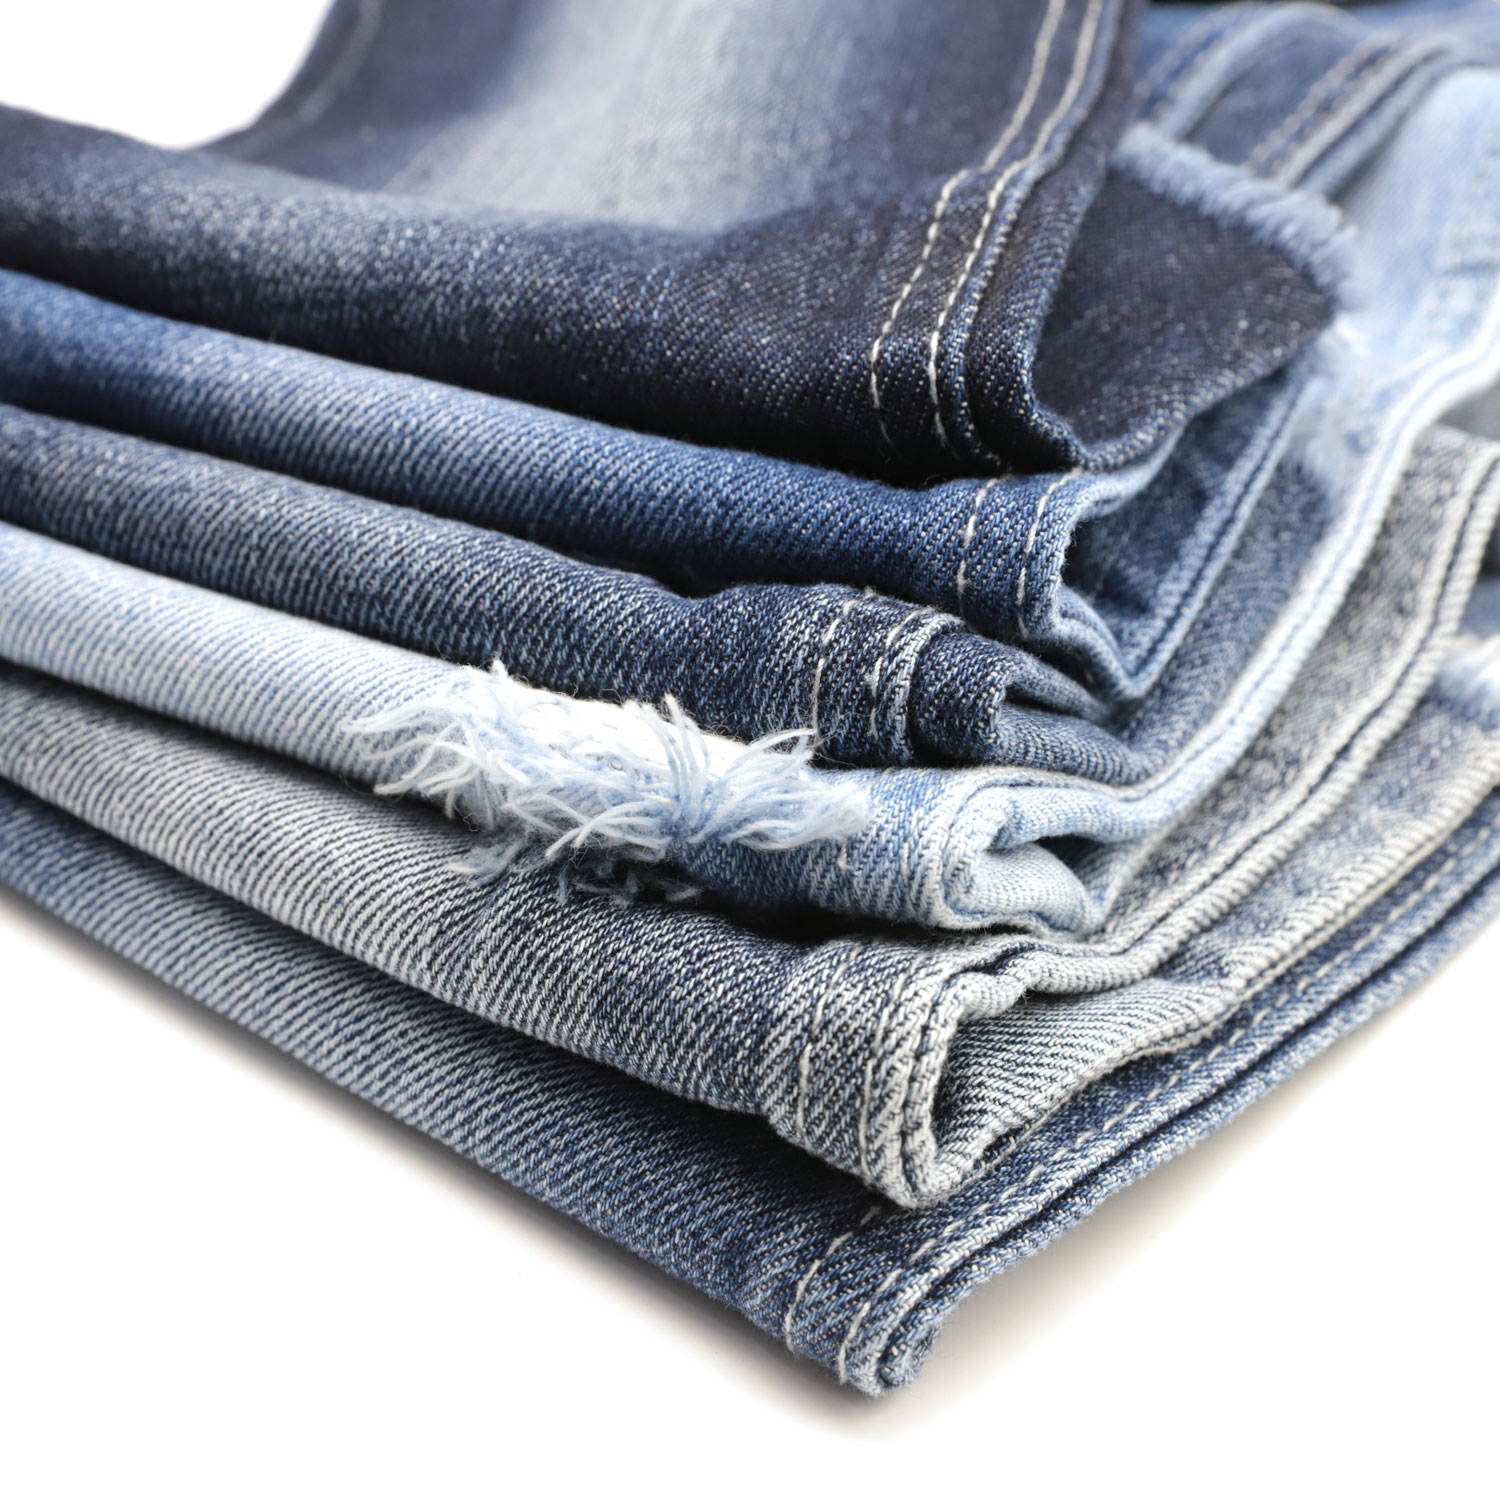 Denim Jeans Material - How to Use the Best One for Your Needs 1